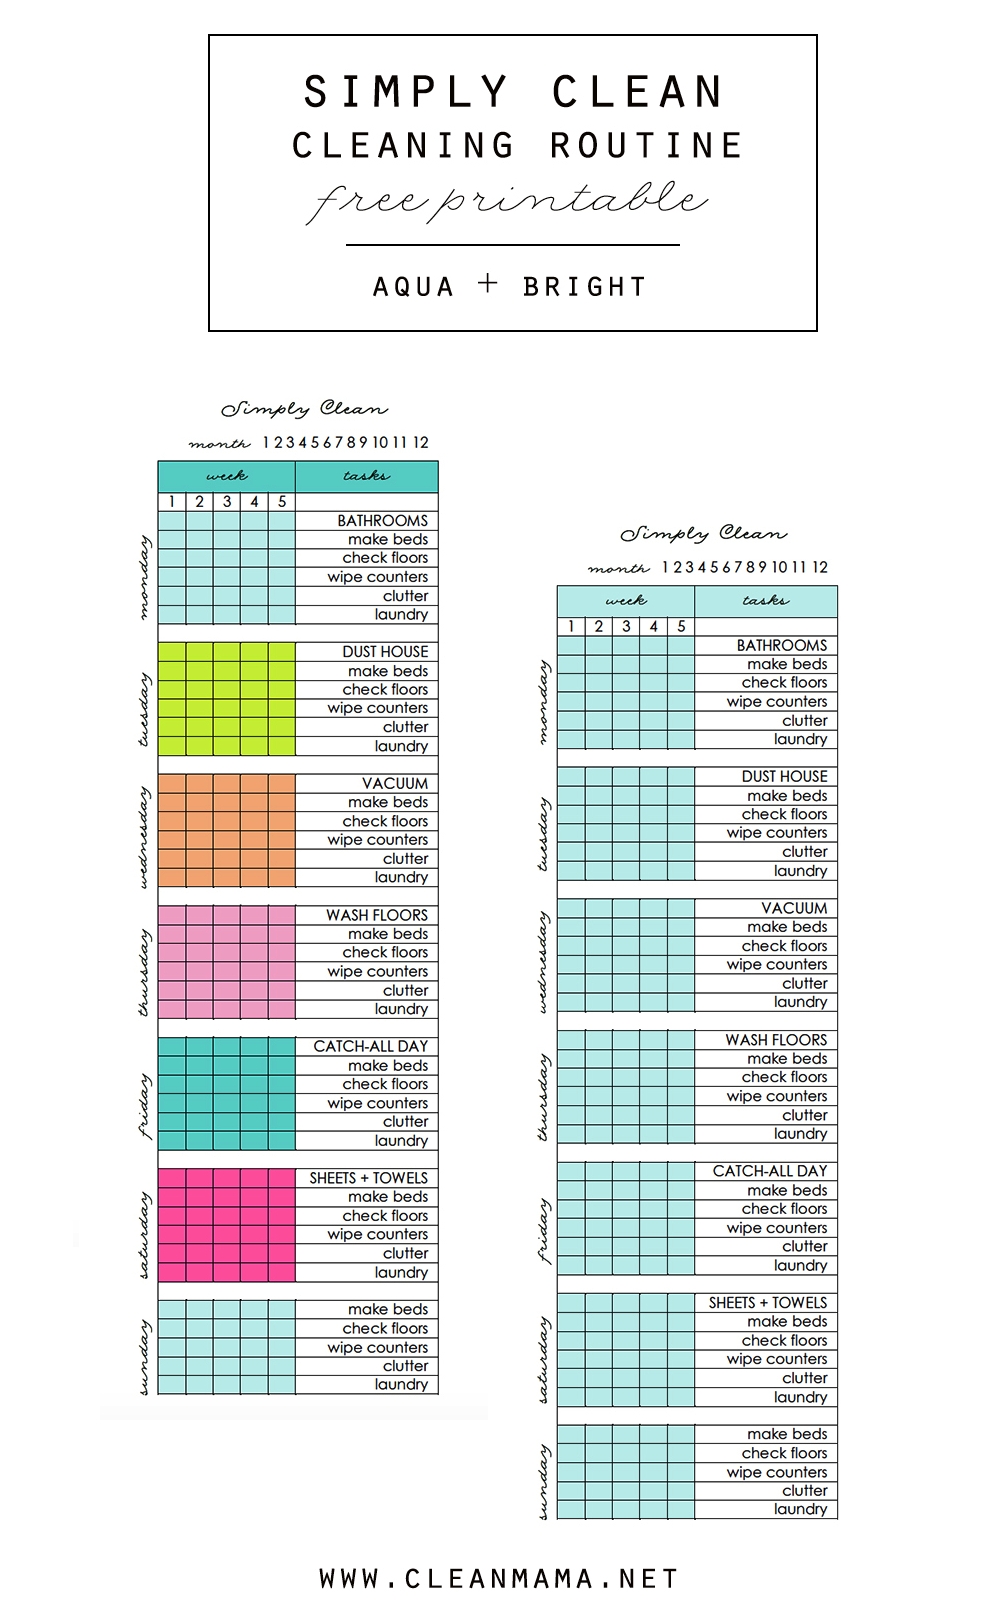 Simply Clean Cleaning Routine At A Glance Free Printable - Clean Mama for Free Printable Blow Up Calendar